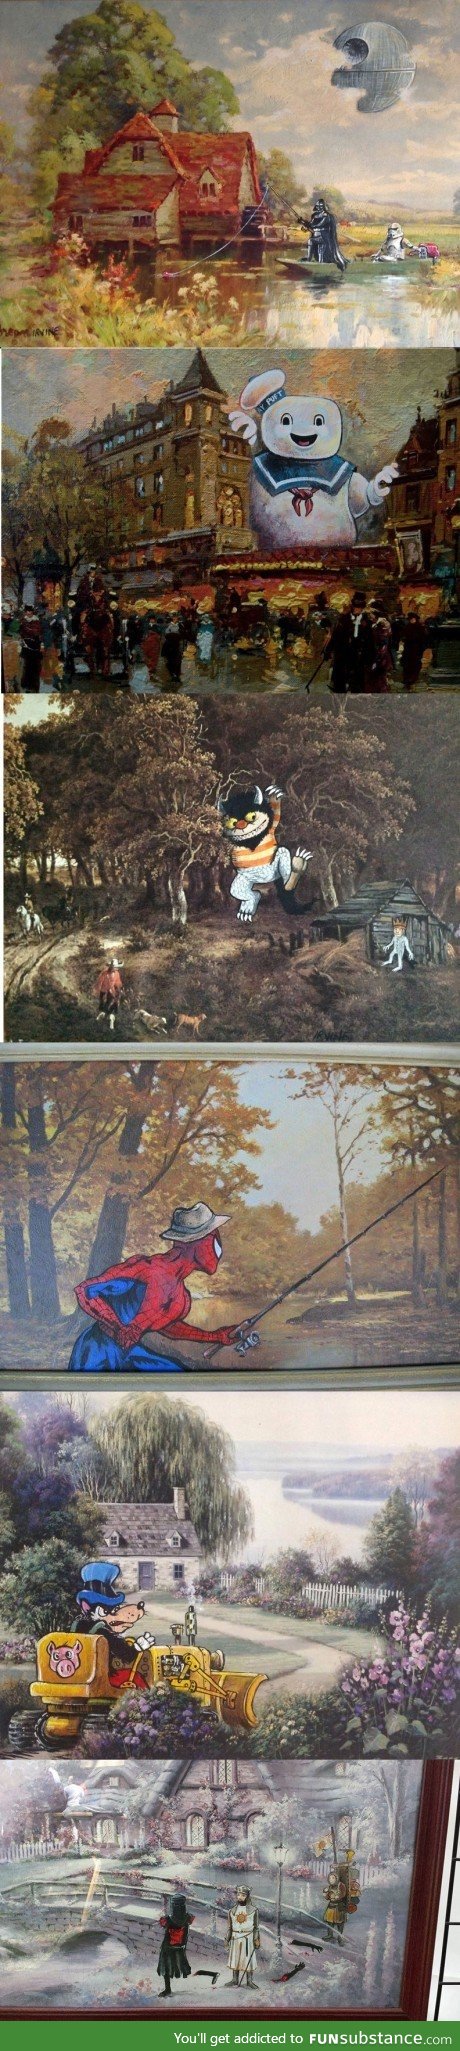 Characters added to thrift-store paintings